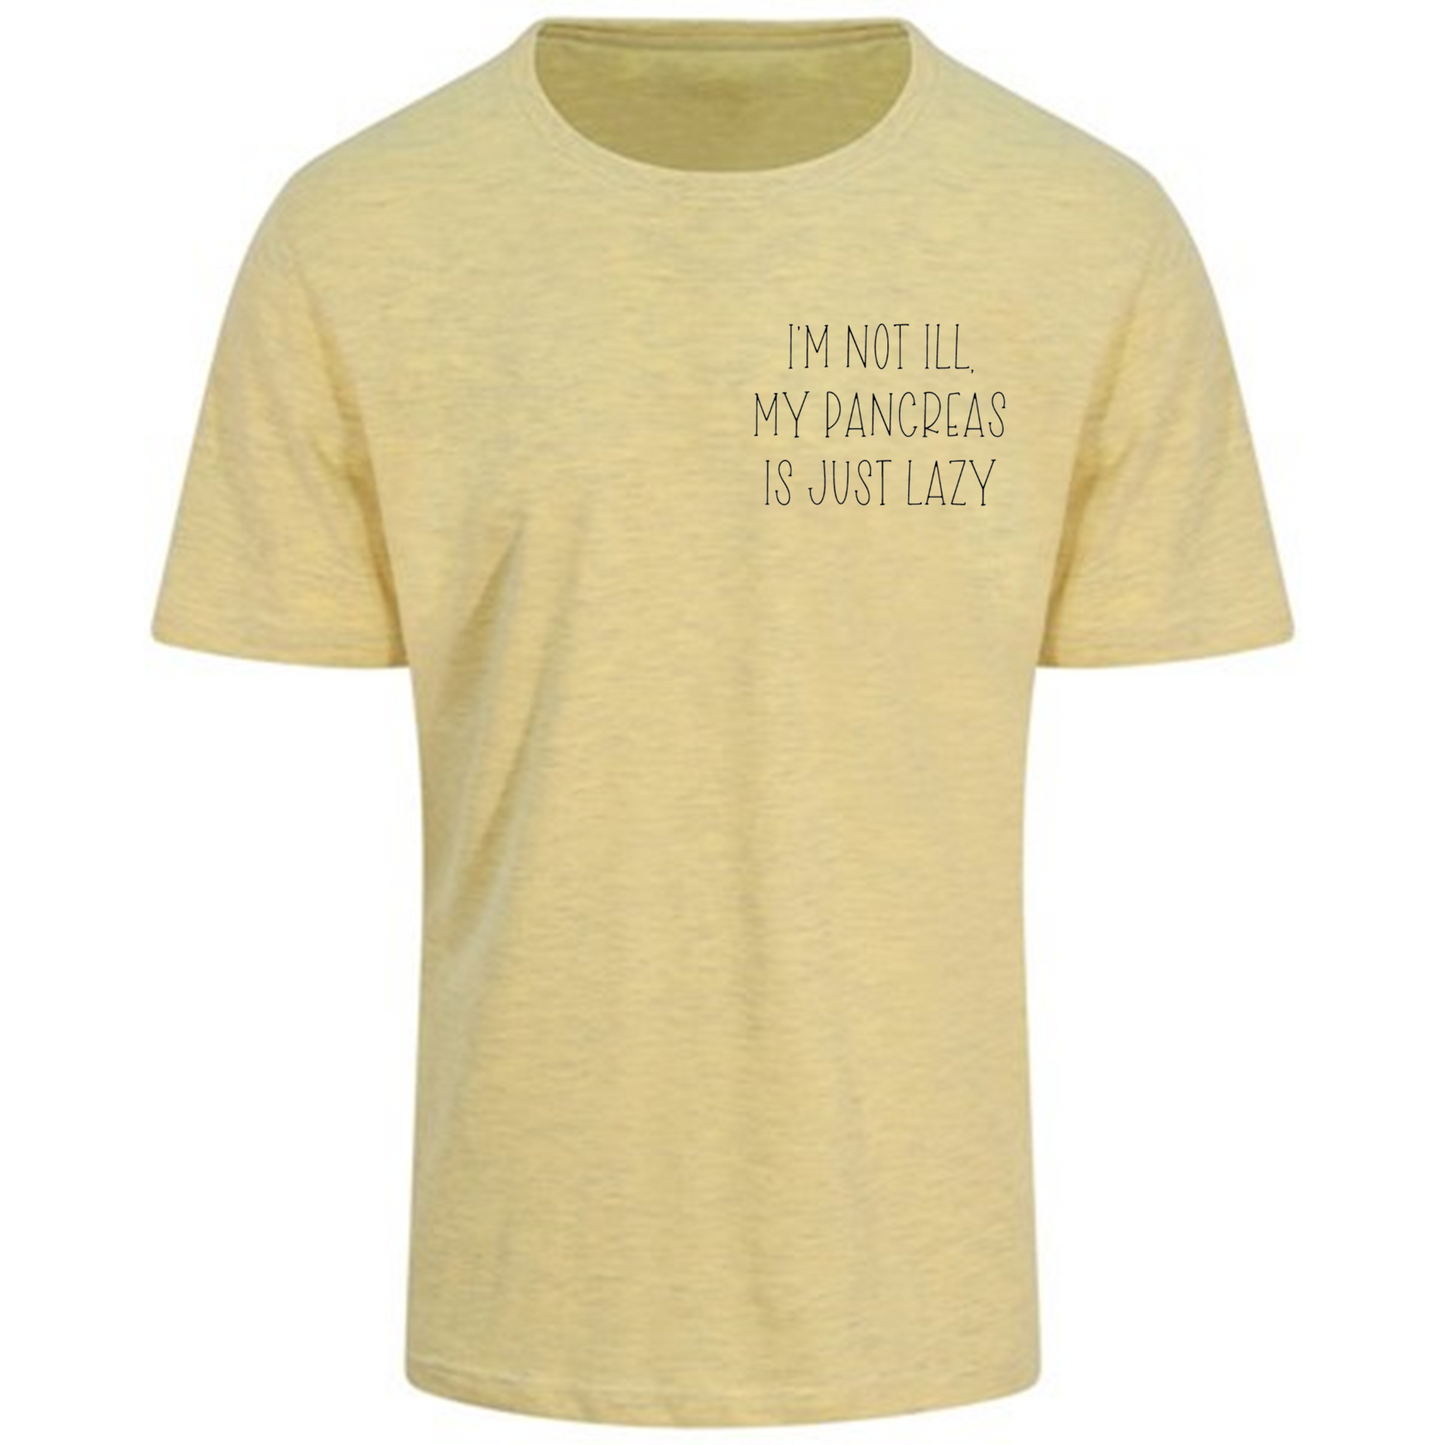 I'm Not Ill, My Pancreas Is Just Lazy Pastel T-Shirt